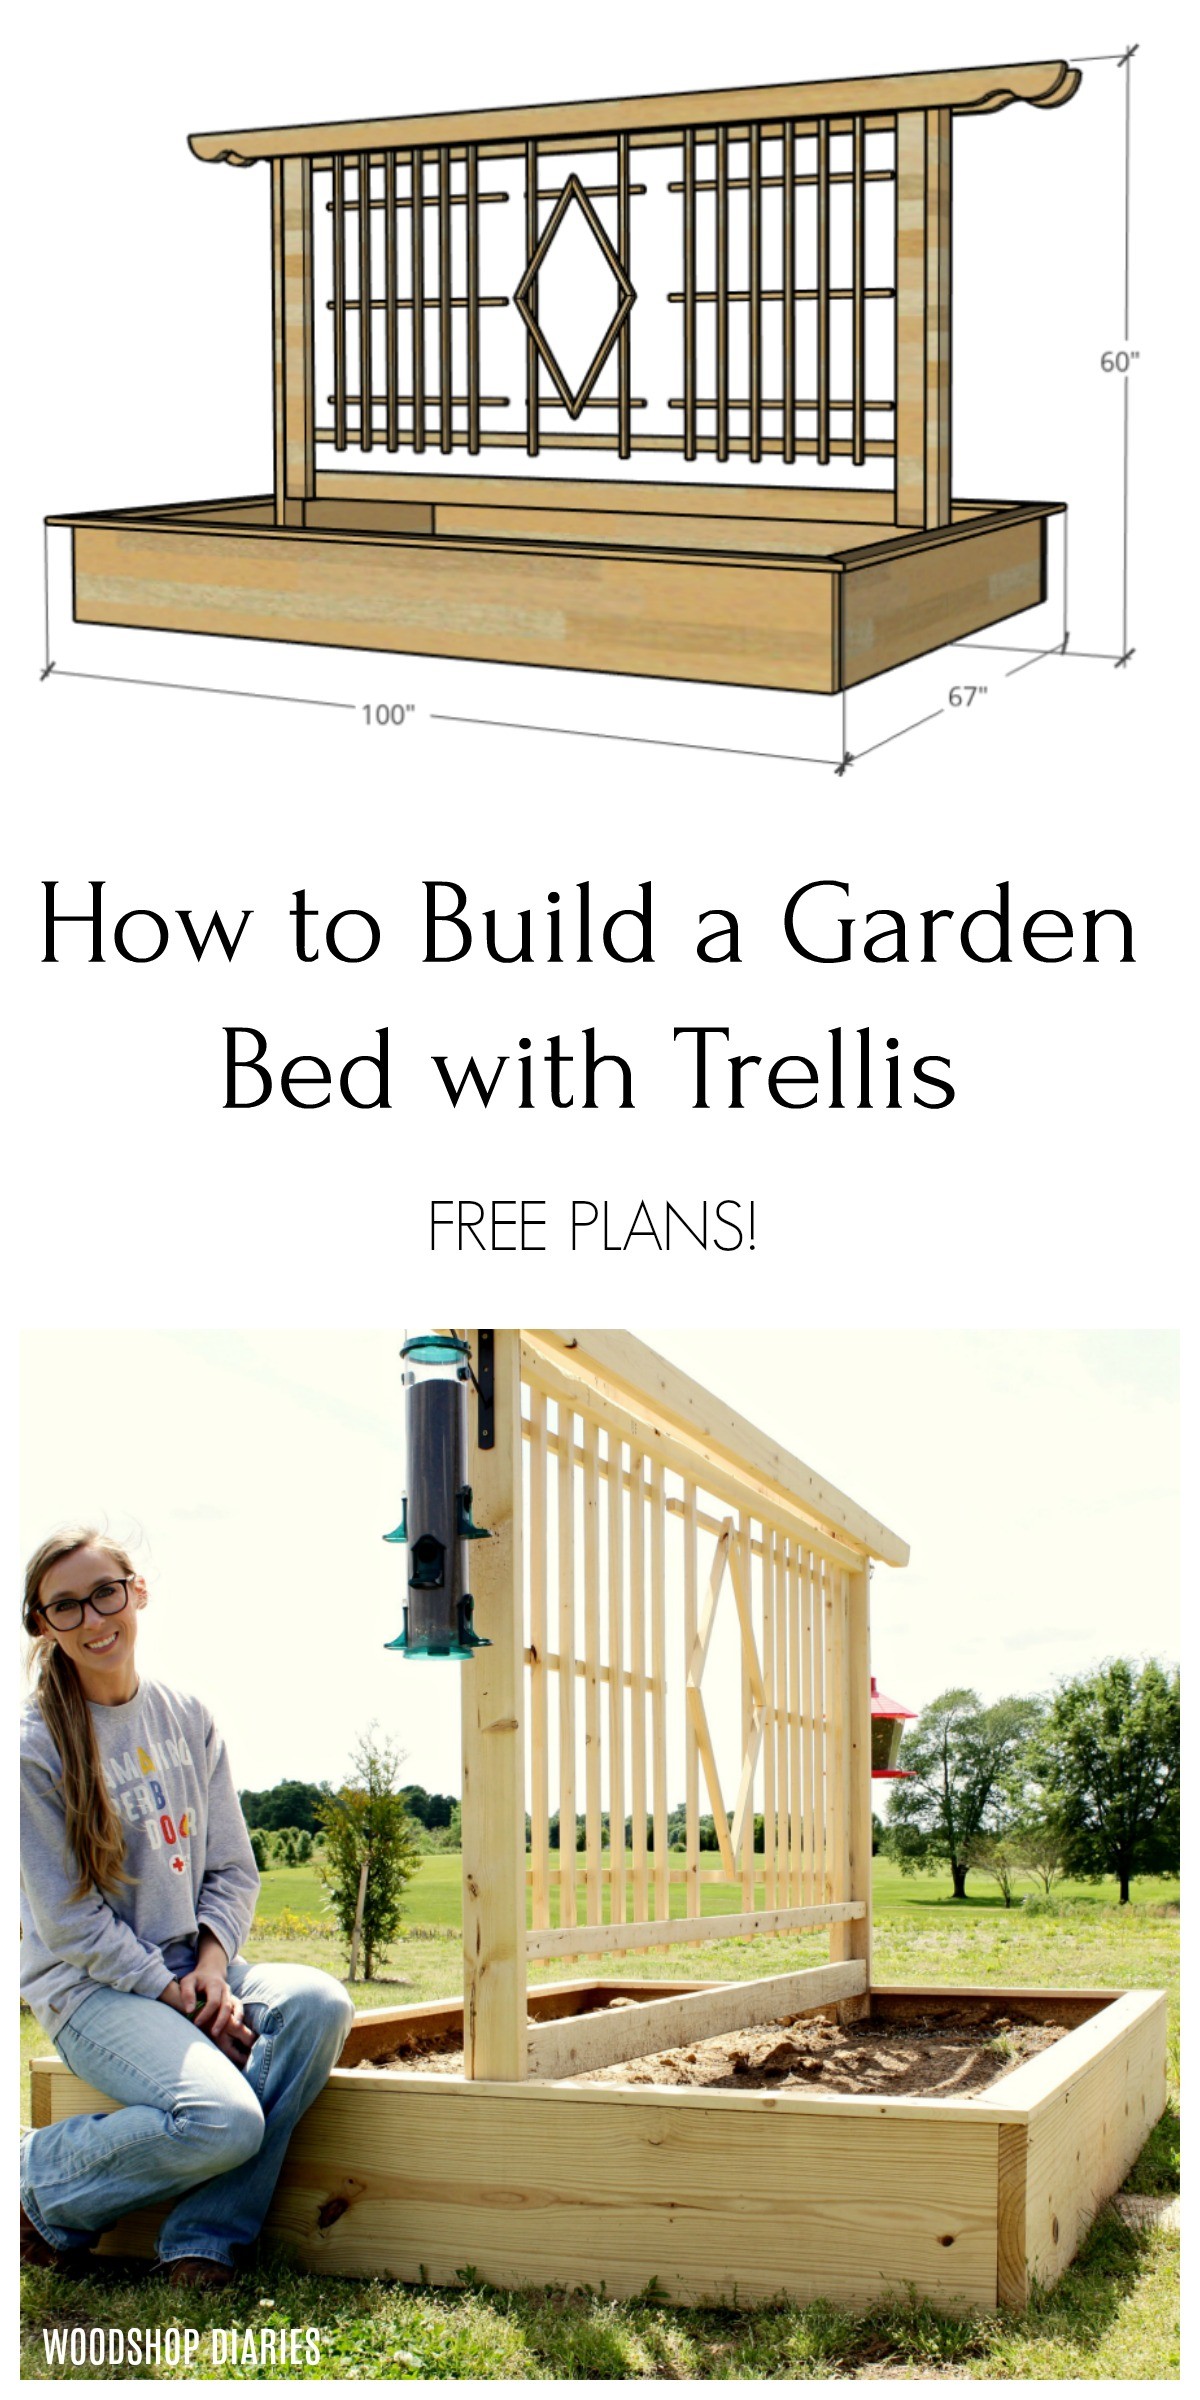 DIY Garden Bed with Trellis Design Pinterest collage--Sketchup drawing and Shara Woodshop Diaries with garden bed